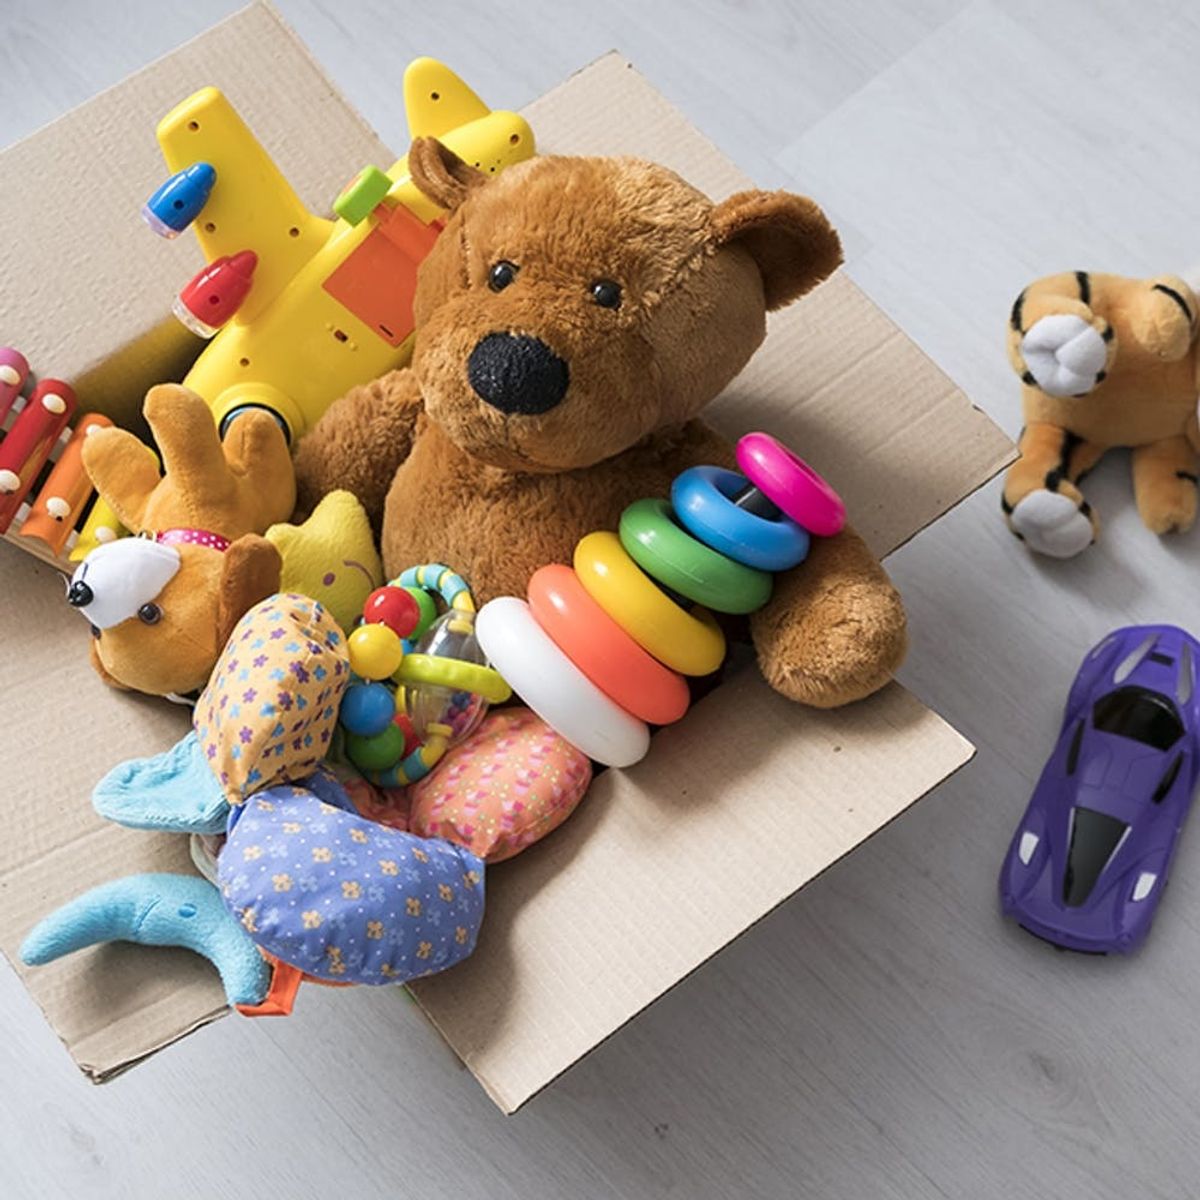 9 Ways to Deal When Your Kid Has Too Many Toys